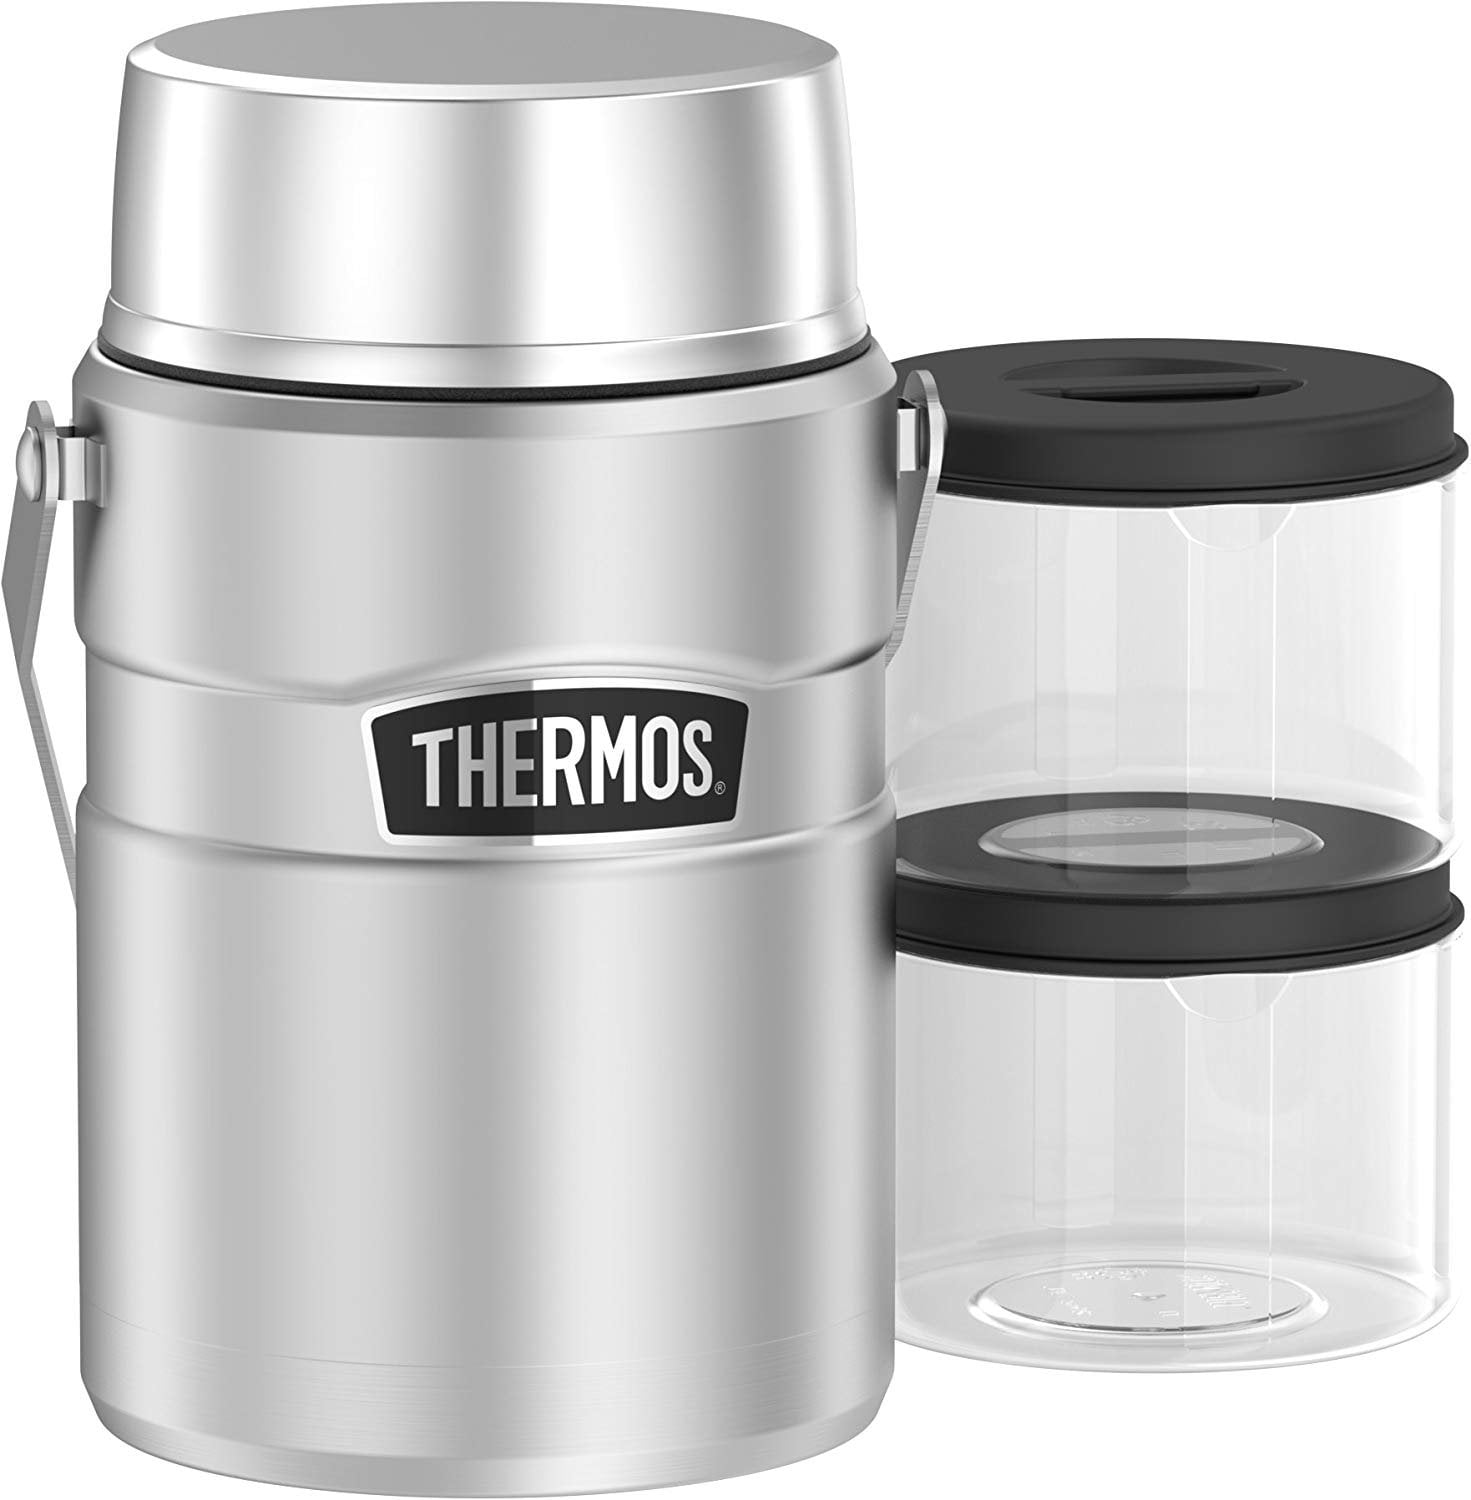 Thermos Stainless Steel Replacement Spoons for King SK300 Food Jars, 2 Set  / NEW